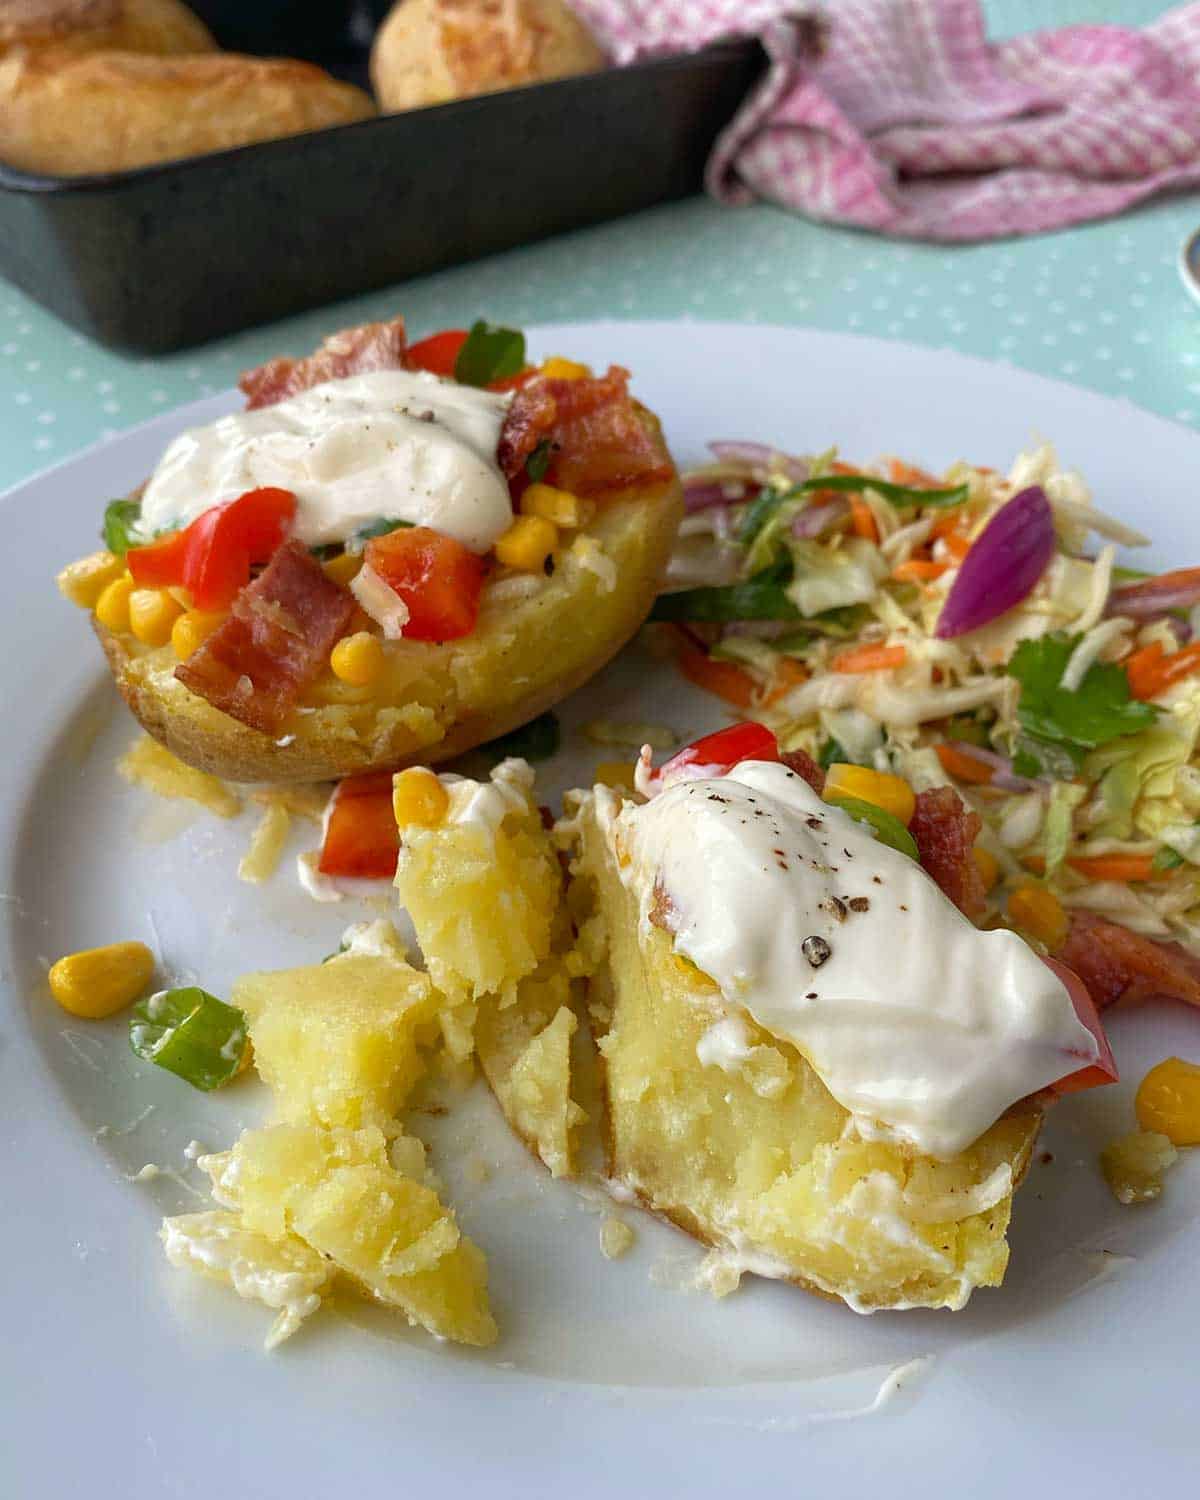 Loaded Baked Potatoes on a white plate served with salad.